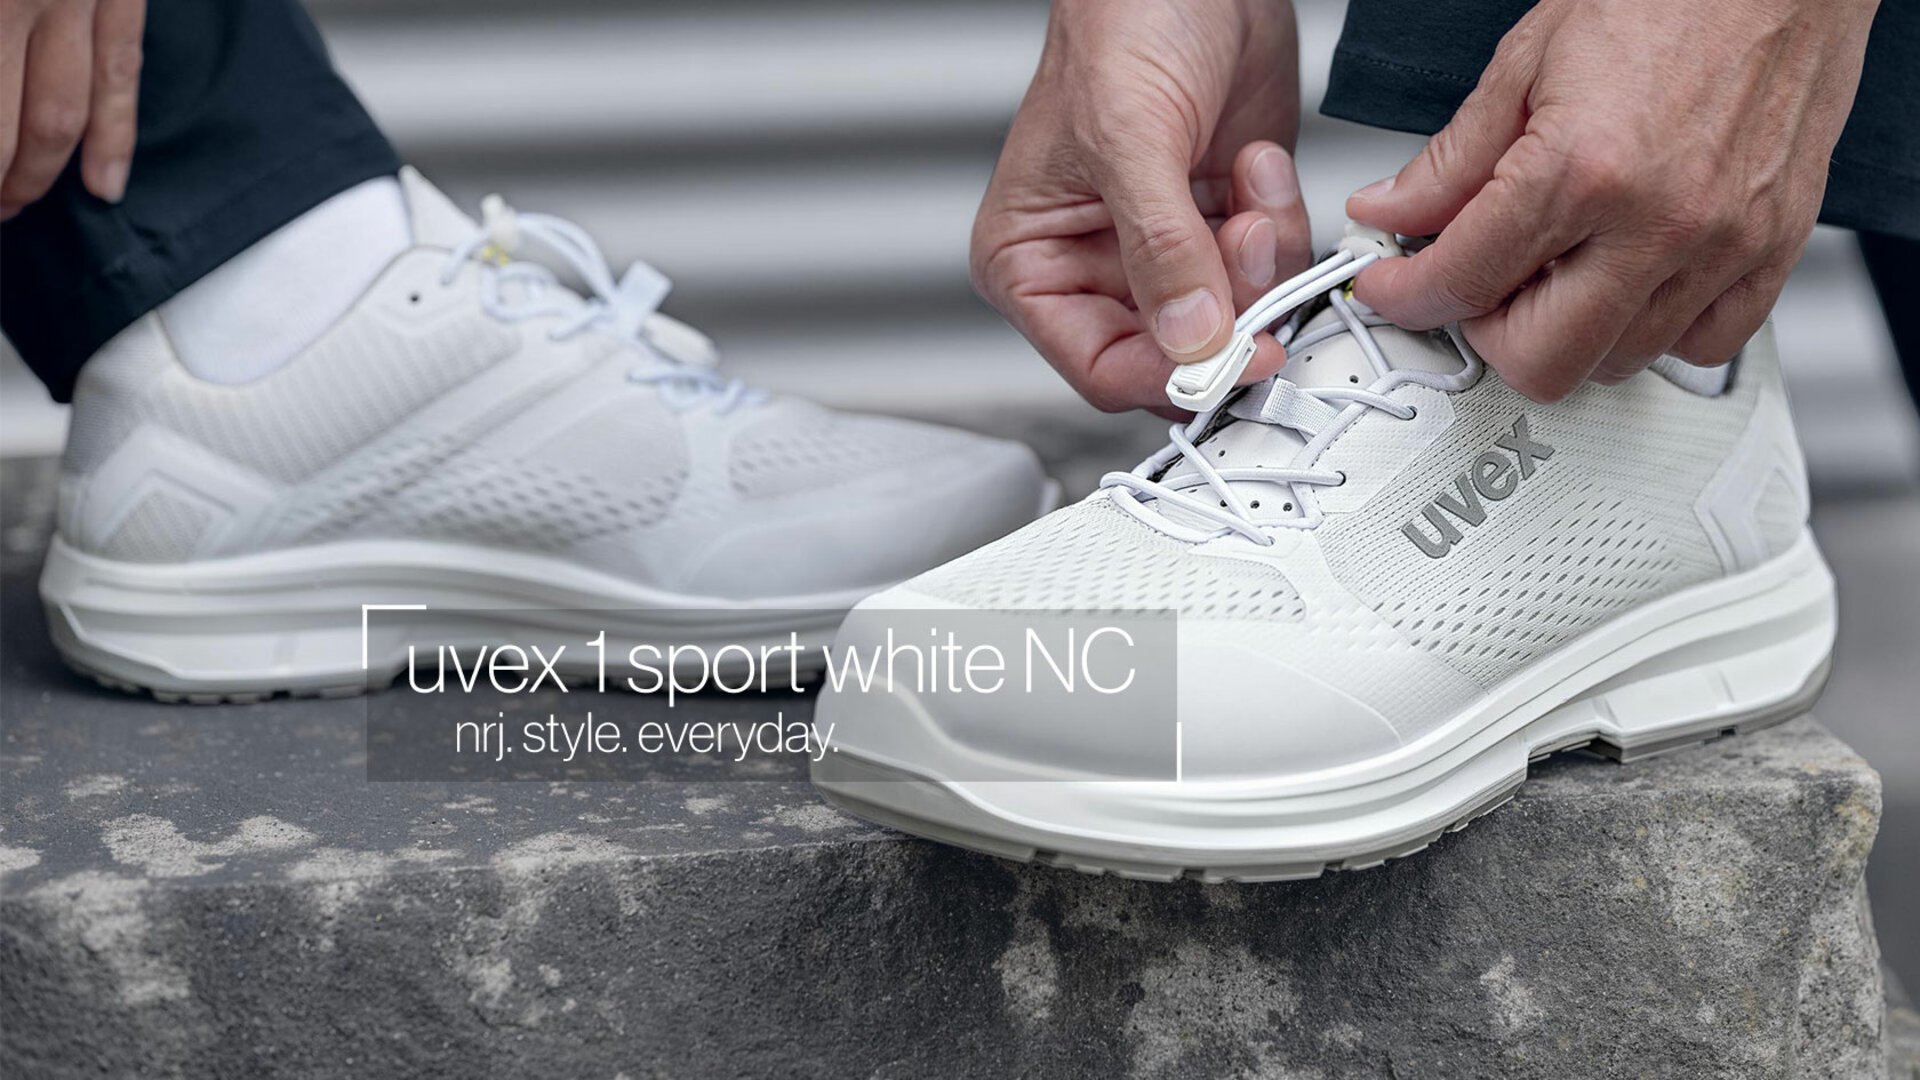 Sporty, white professional shoe also for leisure time